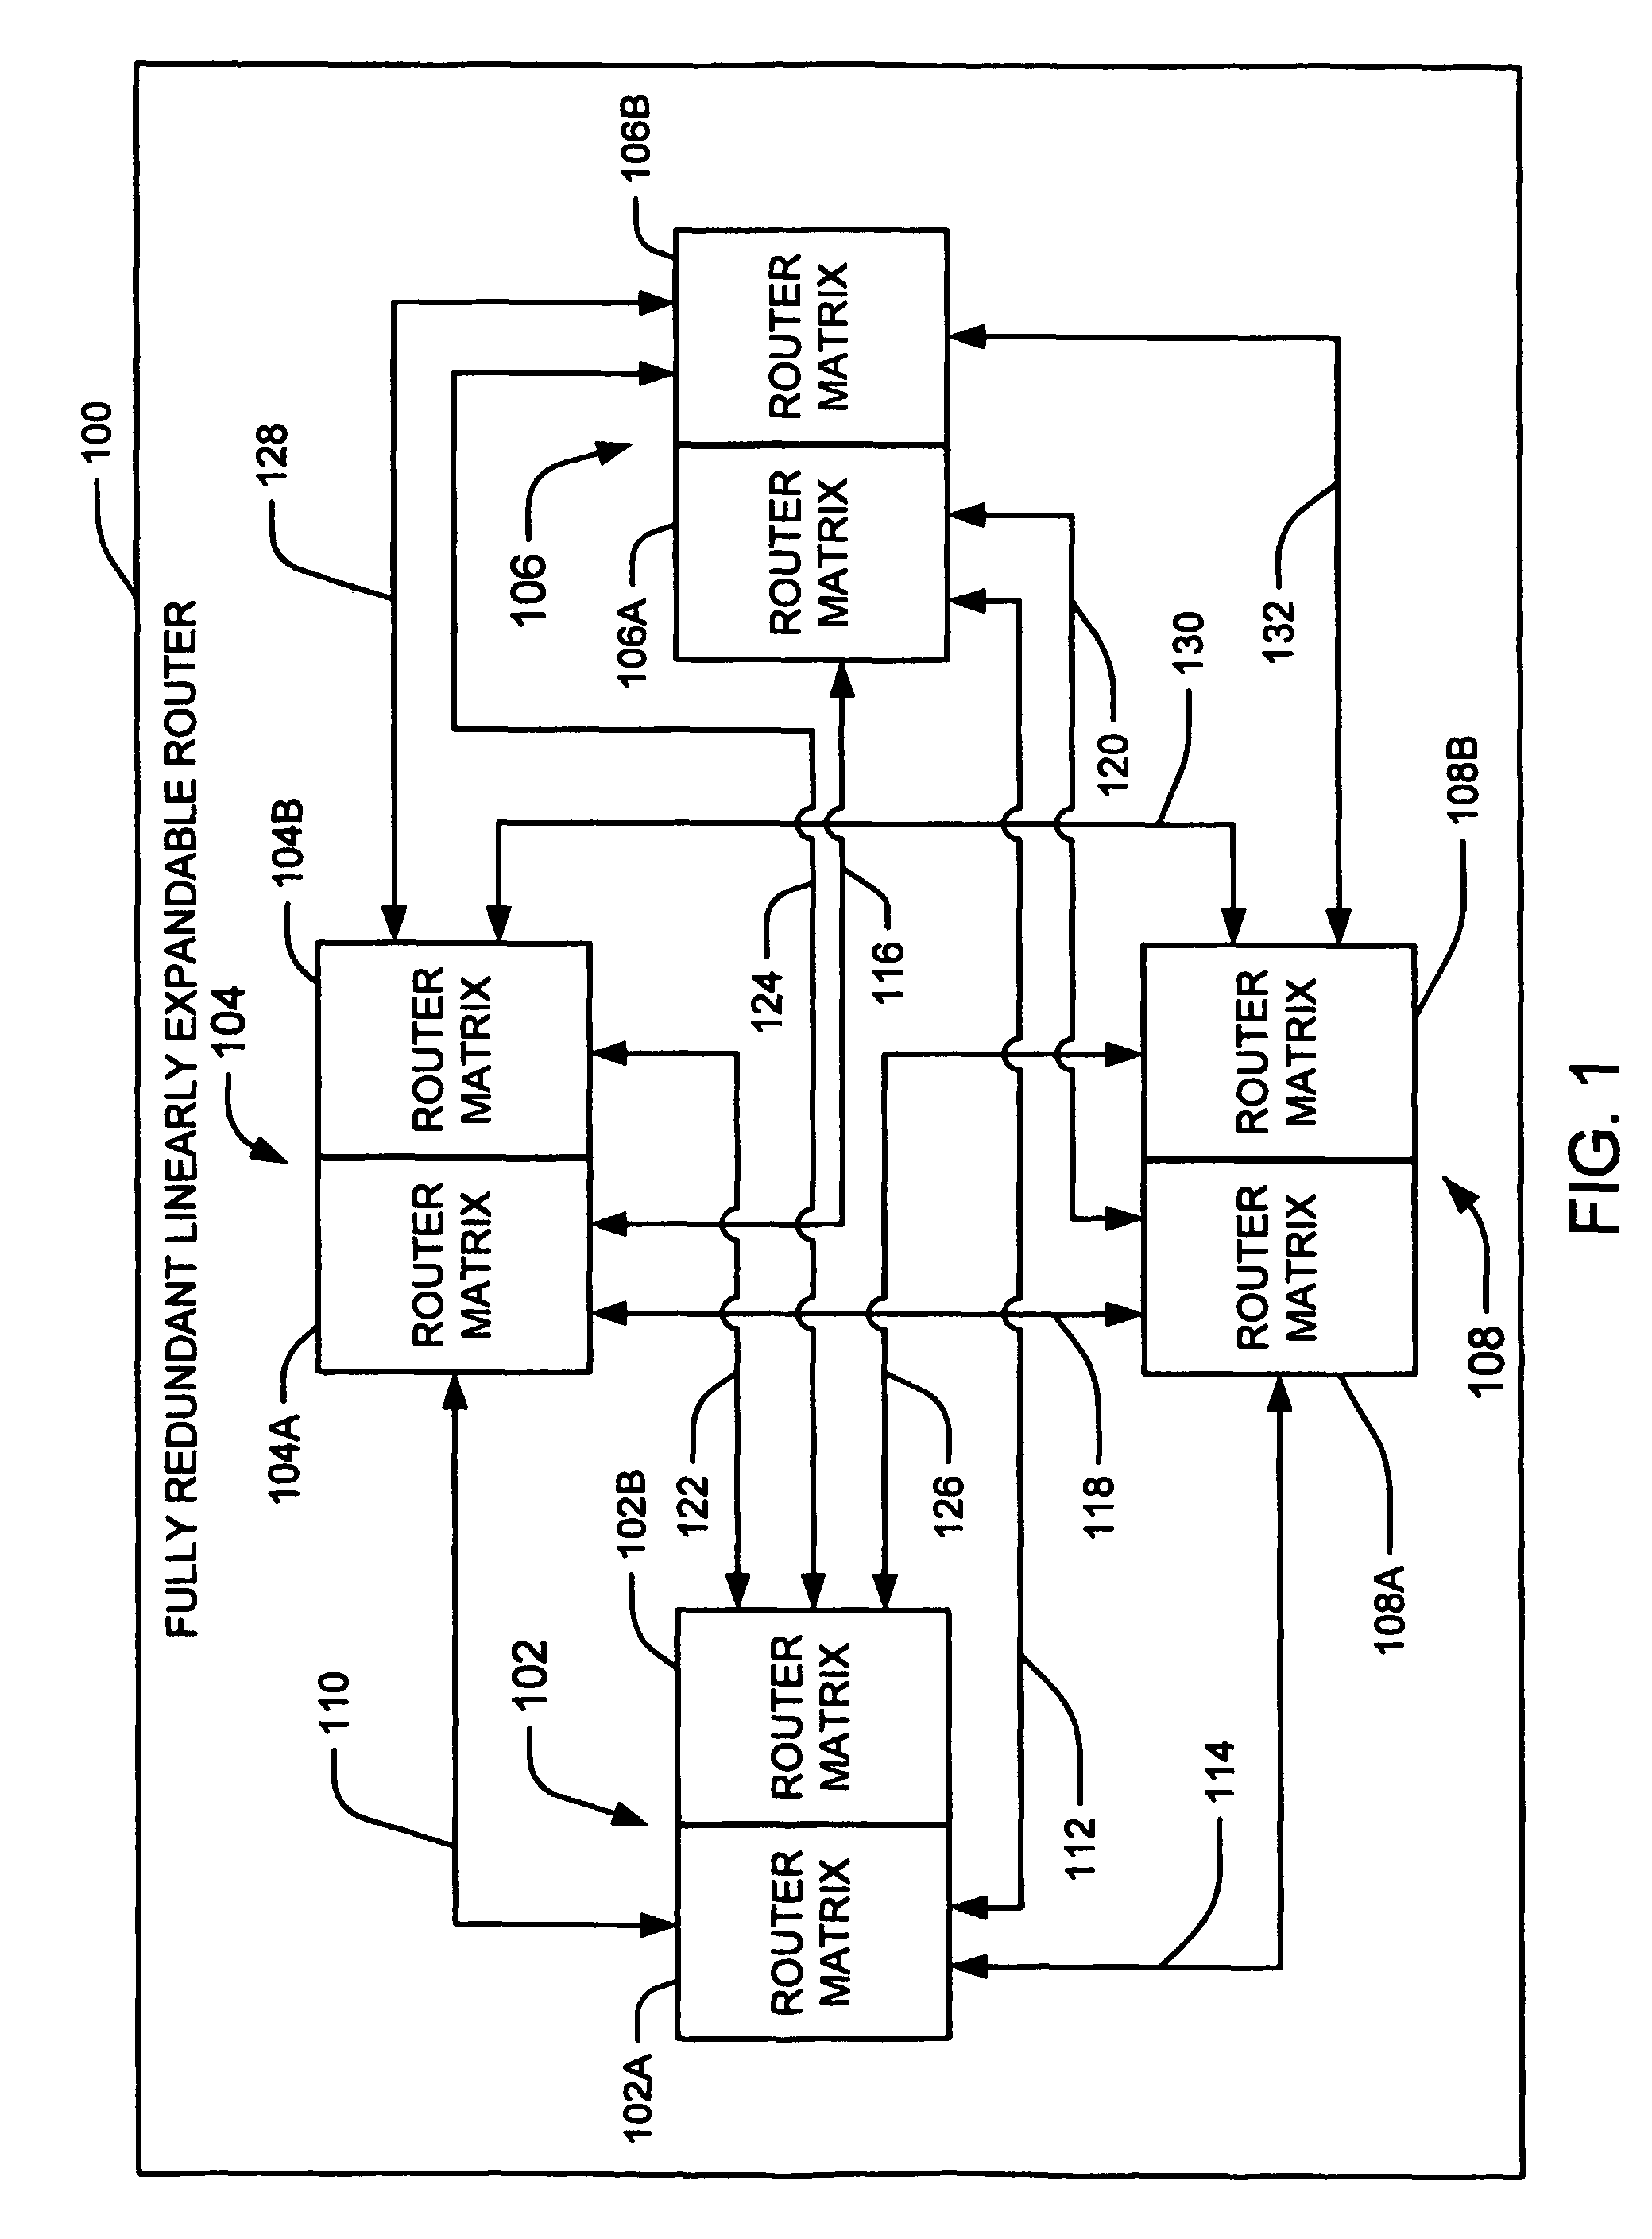 Broadcast router having a shared configuration repository